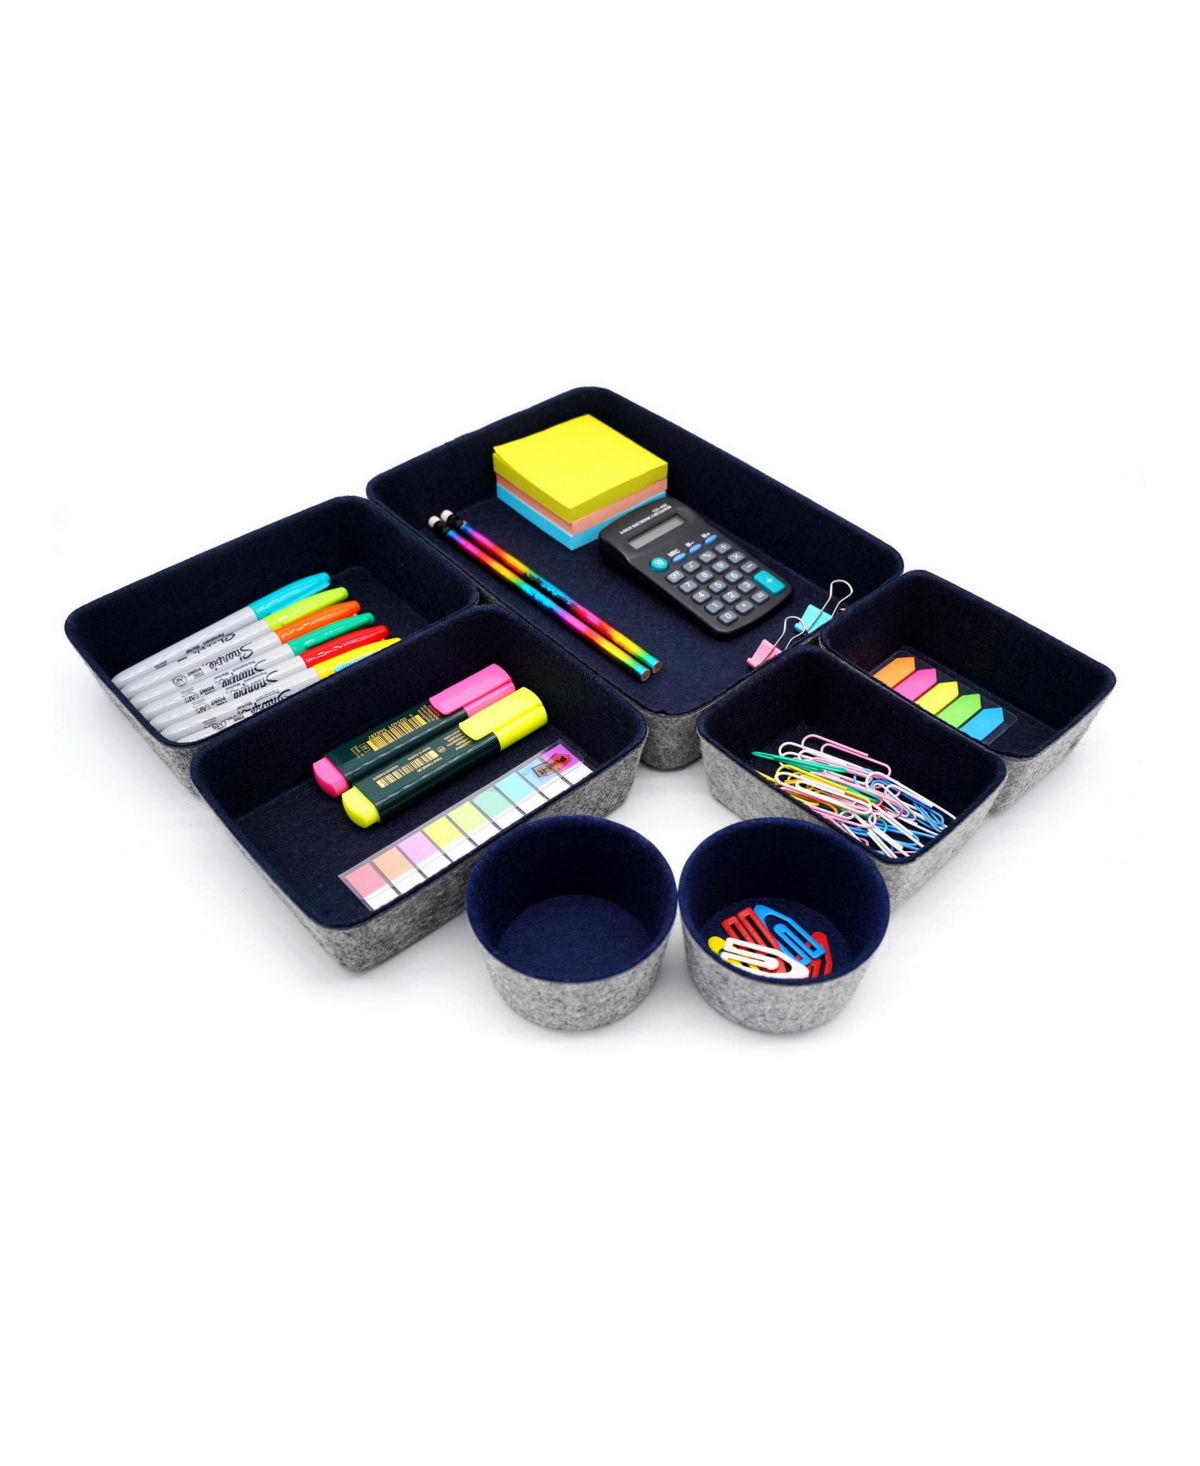 Shop Welaxy 7 Piece Felt Drawer Organizer Set With Round Cups And Trays In Navy